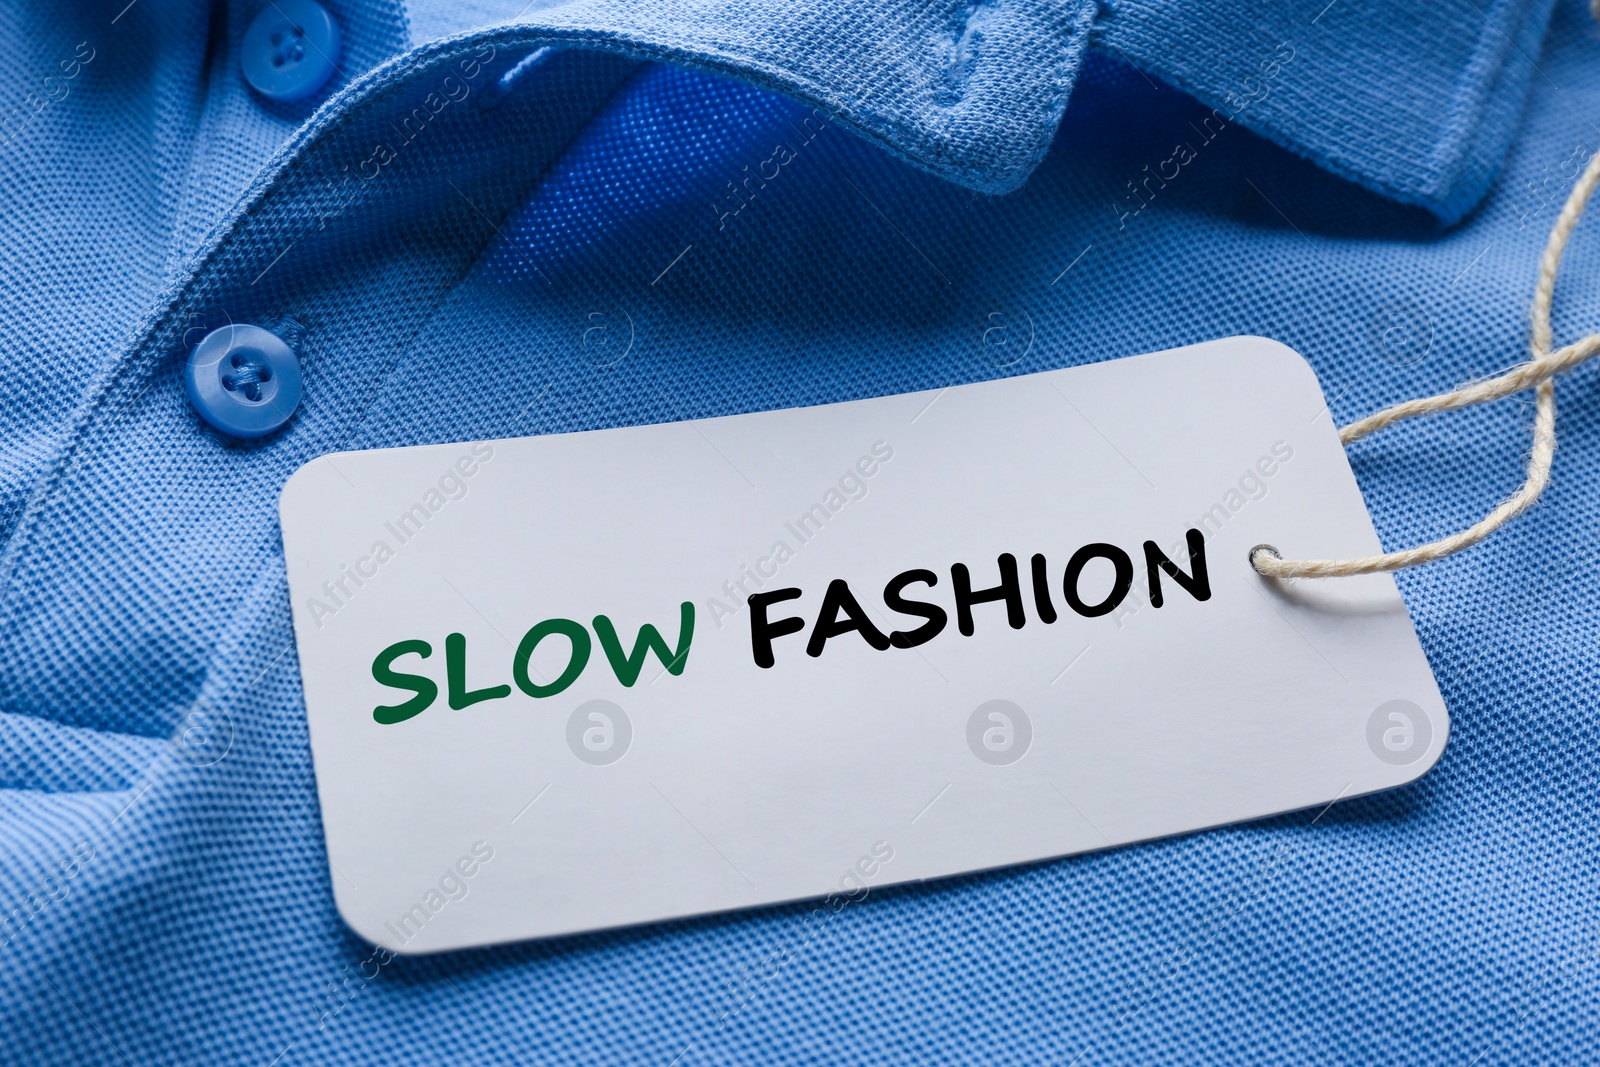 Image of Conscious consumption. Tag with words Slow Fashion on blue shirt, closeup